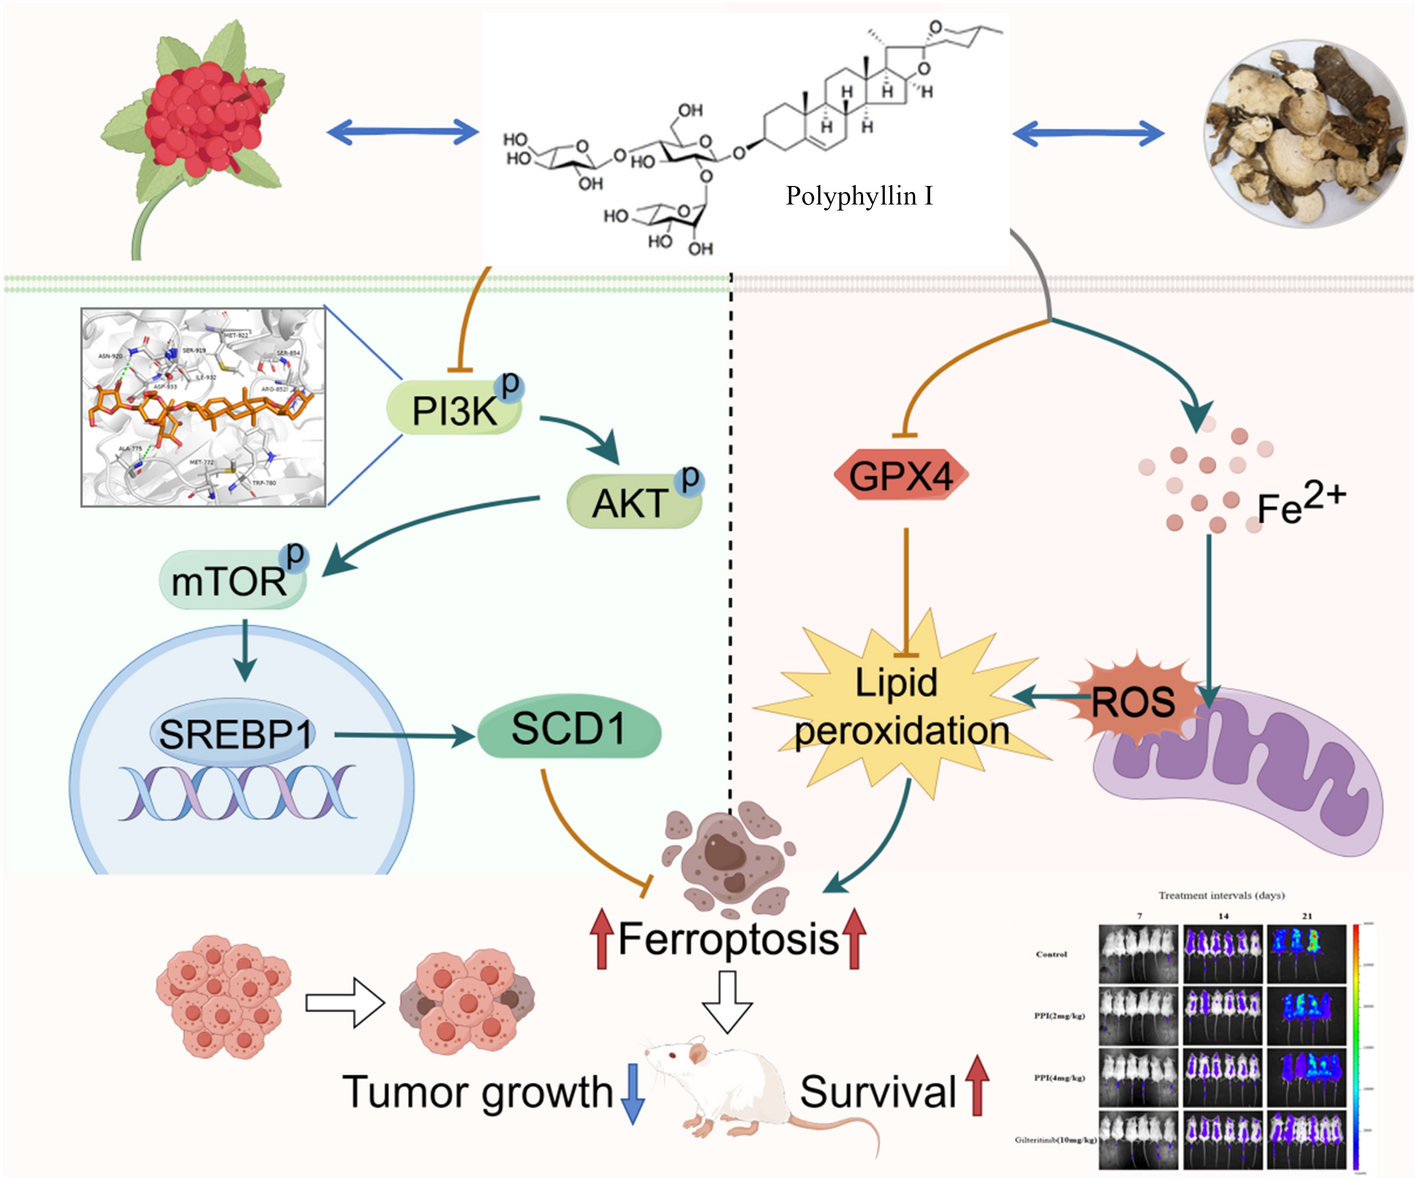 Polyphyllin I induces rapid ferroptosis in acute myeloid leukemia through simultaneous targeting PI3K/SREBP-1/SCD1 axis and triggering of lipid peroxidation